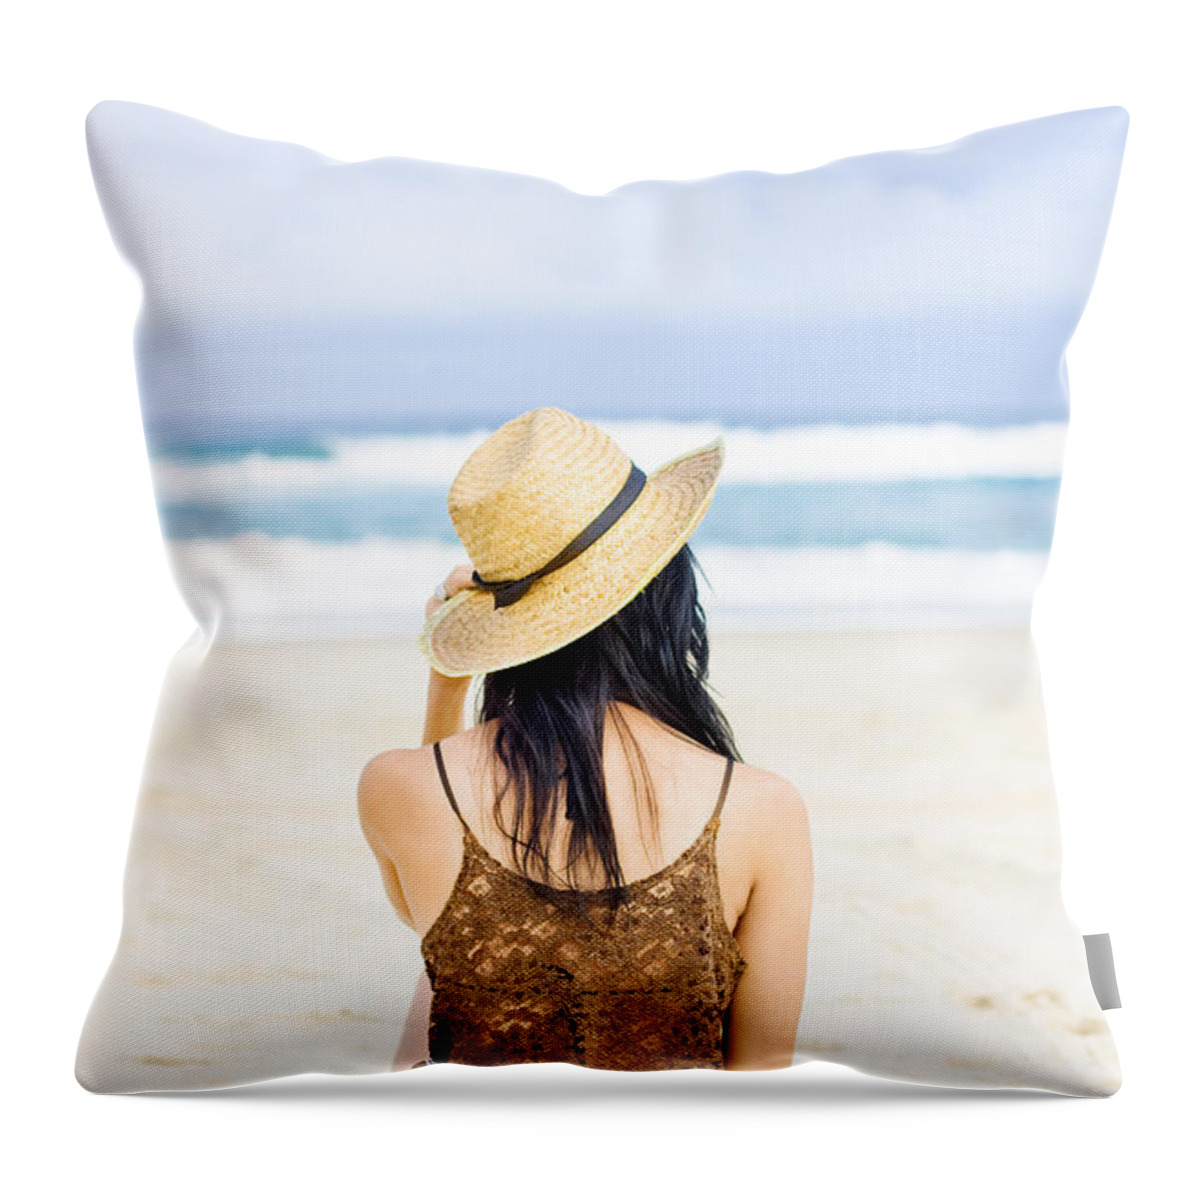 Beach Throw Pillow featuring the photograph Gazing Out At The Ocean by Jorgo Photography